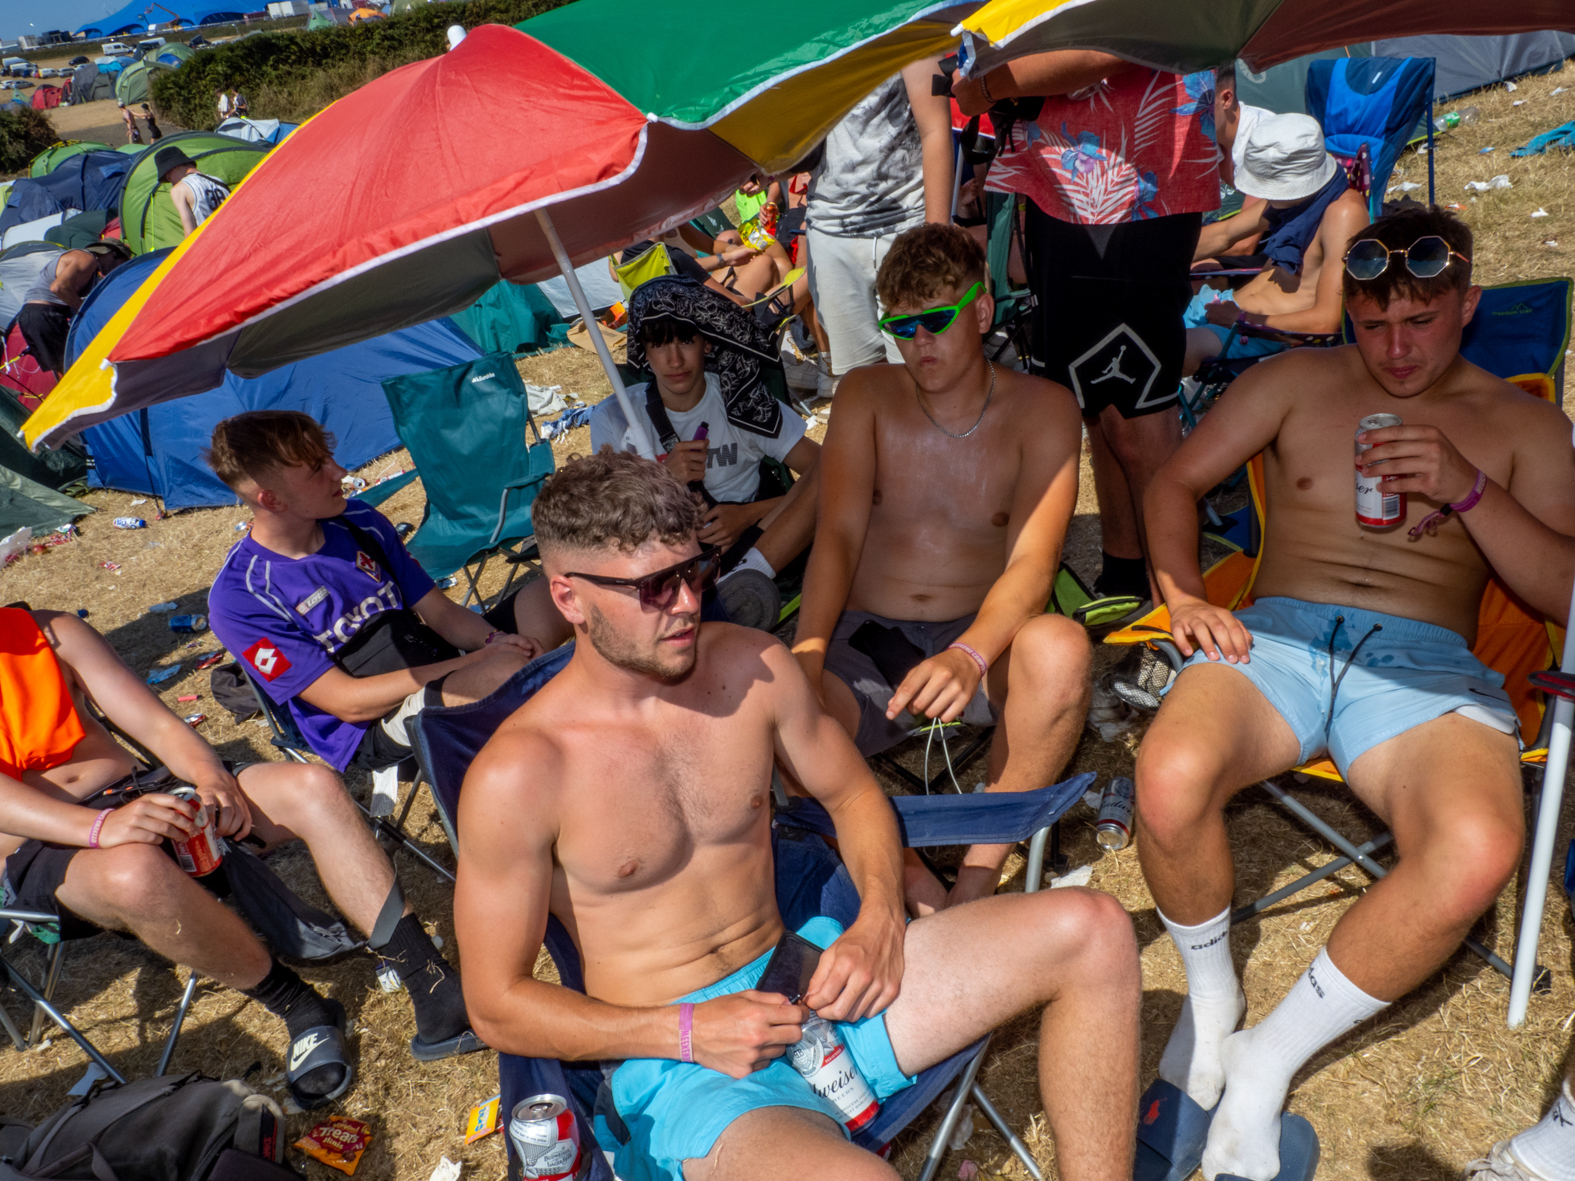 NEWQUAY, ENGLAND - AUGUST, 2022: Friends from Swansea, Wales realx in the shade at the Boardmasters FEstival camp site. During a heatwave in England, thousands of visitors headed to the town of Newquay, Cornwall for the surfing, beaches and Boardmasters Festival. Resources during the summer are stretched and some local residents are being pushed out of the area by tourists and due to an influx of holiday homes.